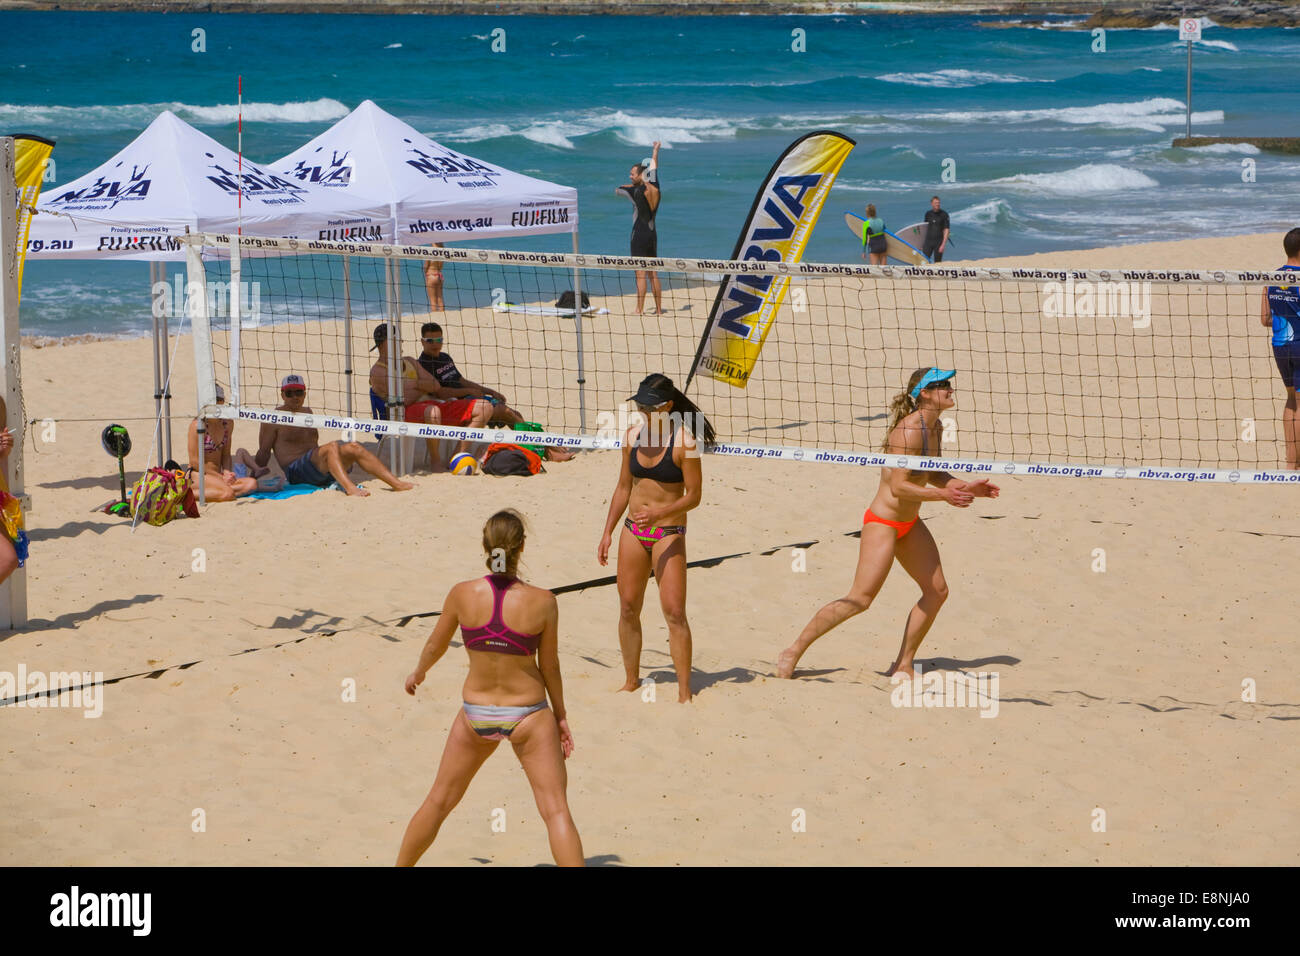 play game of beach volleyball on manly beach,sydney,australia organised by beaches volleyball Stock Photo - Alamy